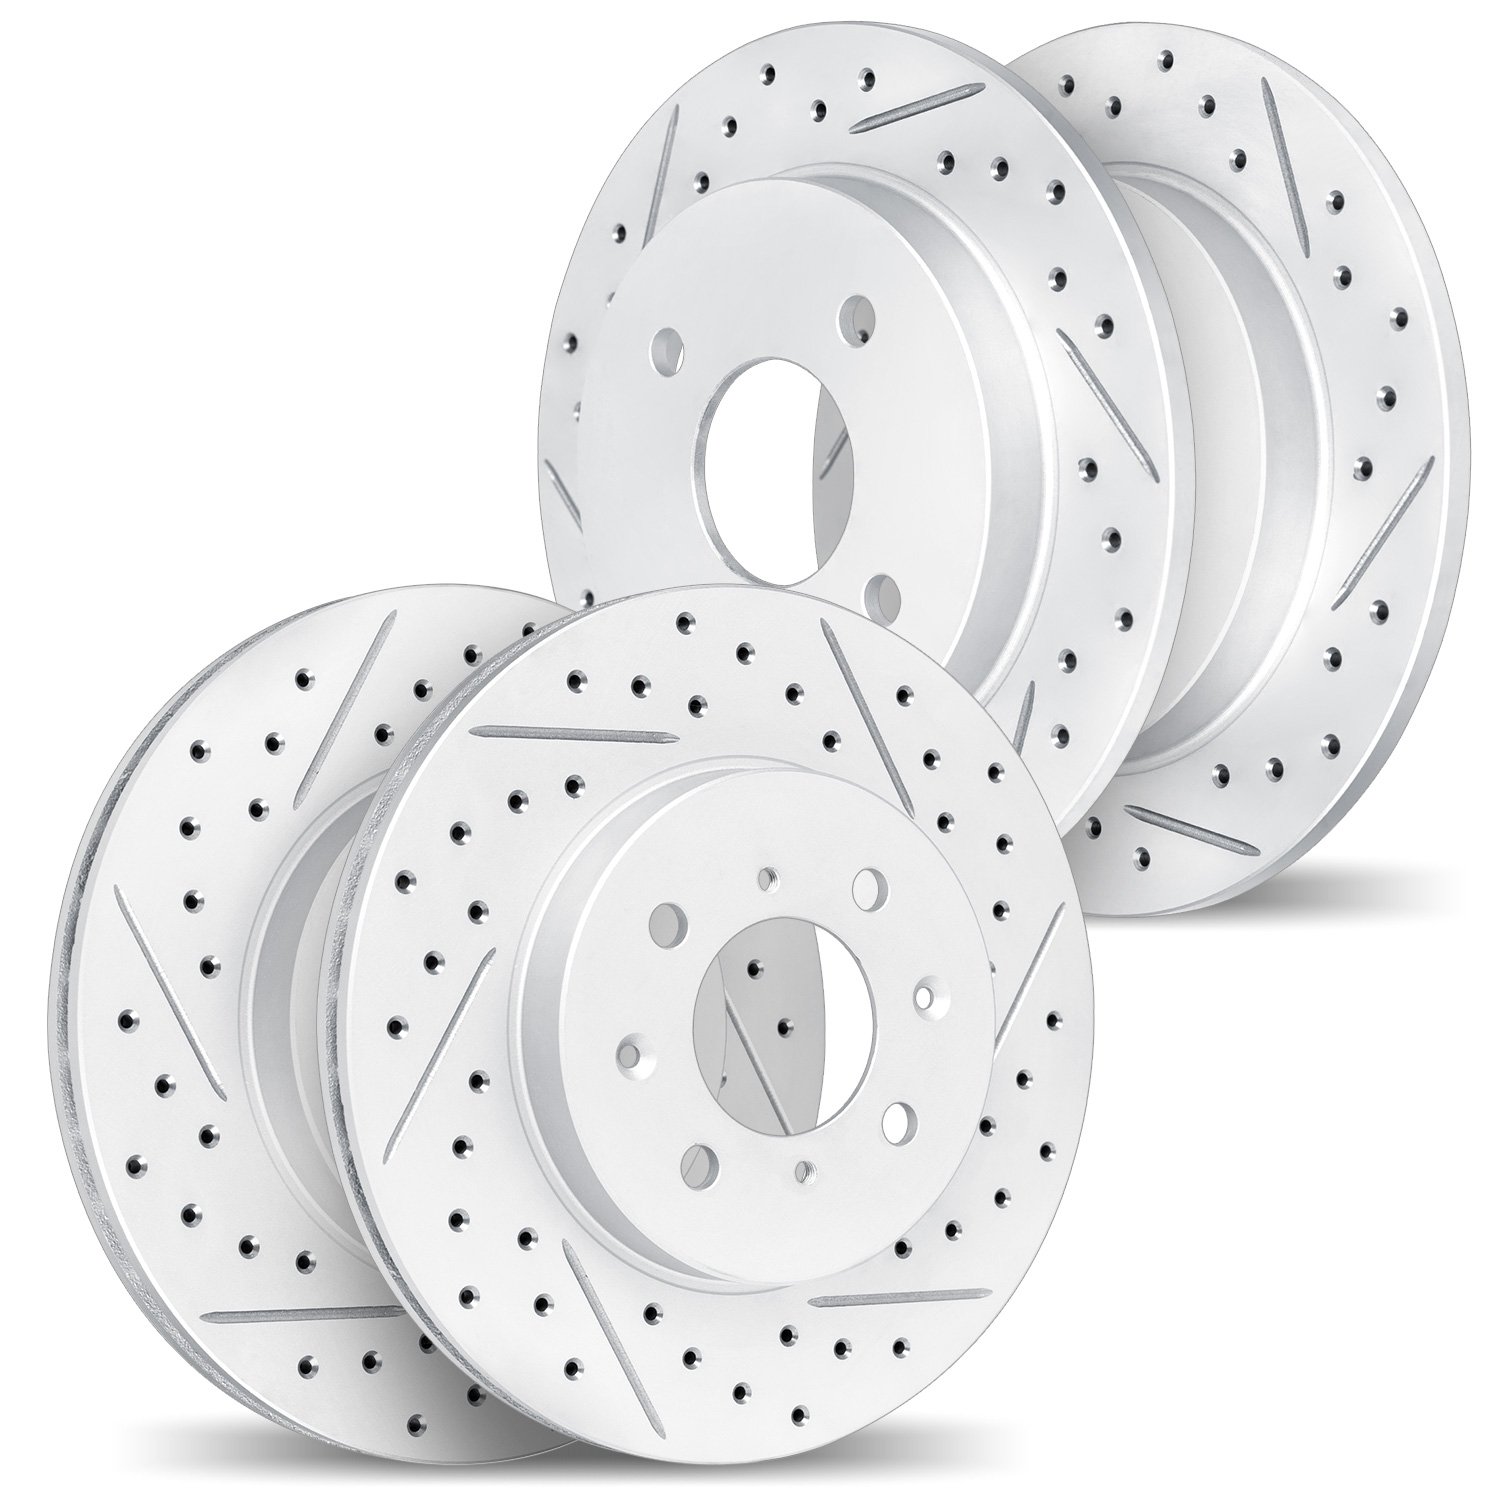 2004-67020 Geoperformance Drilled/Slotted Brake Rotors, 1989-1998 Infiniti/Nissan, Position: Front and Rear